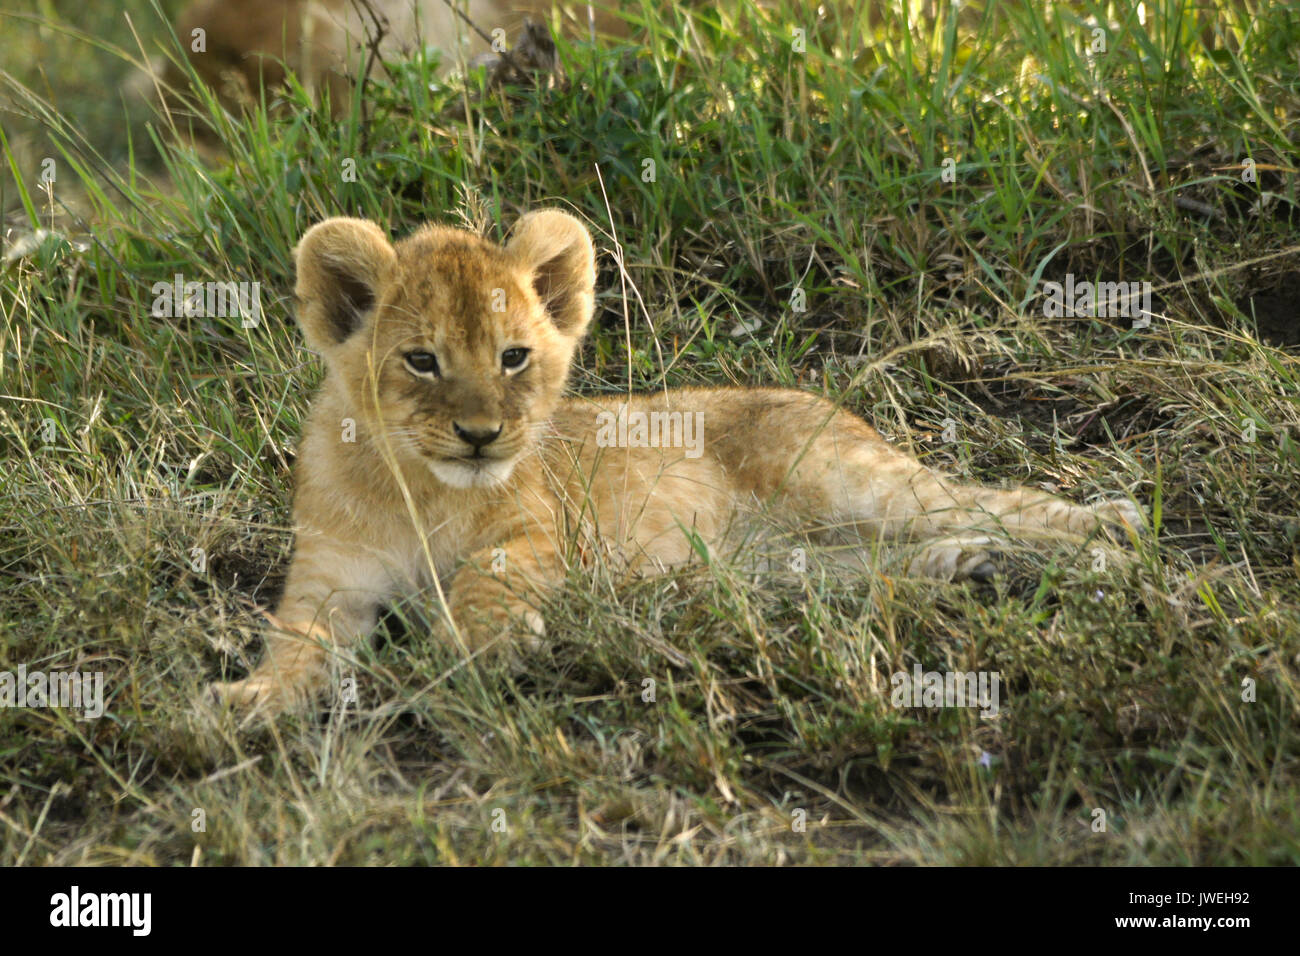 Tiny lion cub awake while the rest of the pride sleeps in the shade, Masai Mara Game Reserve, Kenya Stock Photo